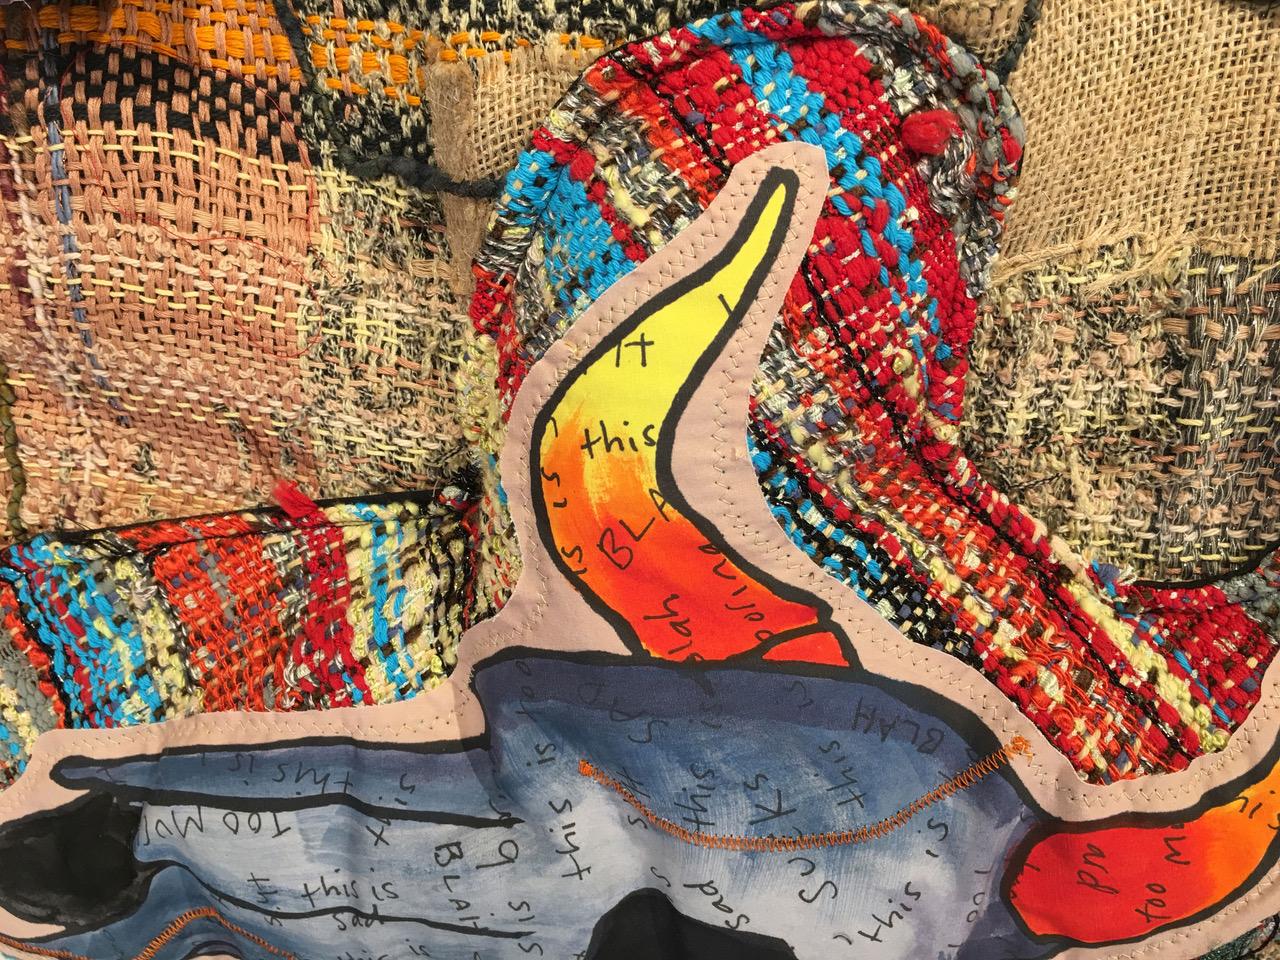 Juliet Martin makes her viewers see the message beyond the joke. Her satiric memoirs illustrate personal stories with playful forms, painful punchlines, and caustic visual one-liners.
Why fiber? Weaving fabric physically and mentally attaches her to